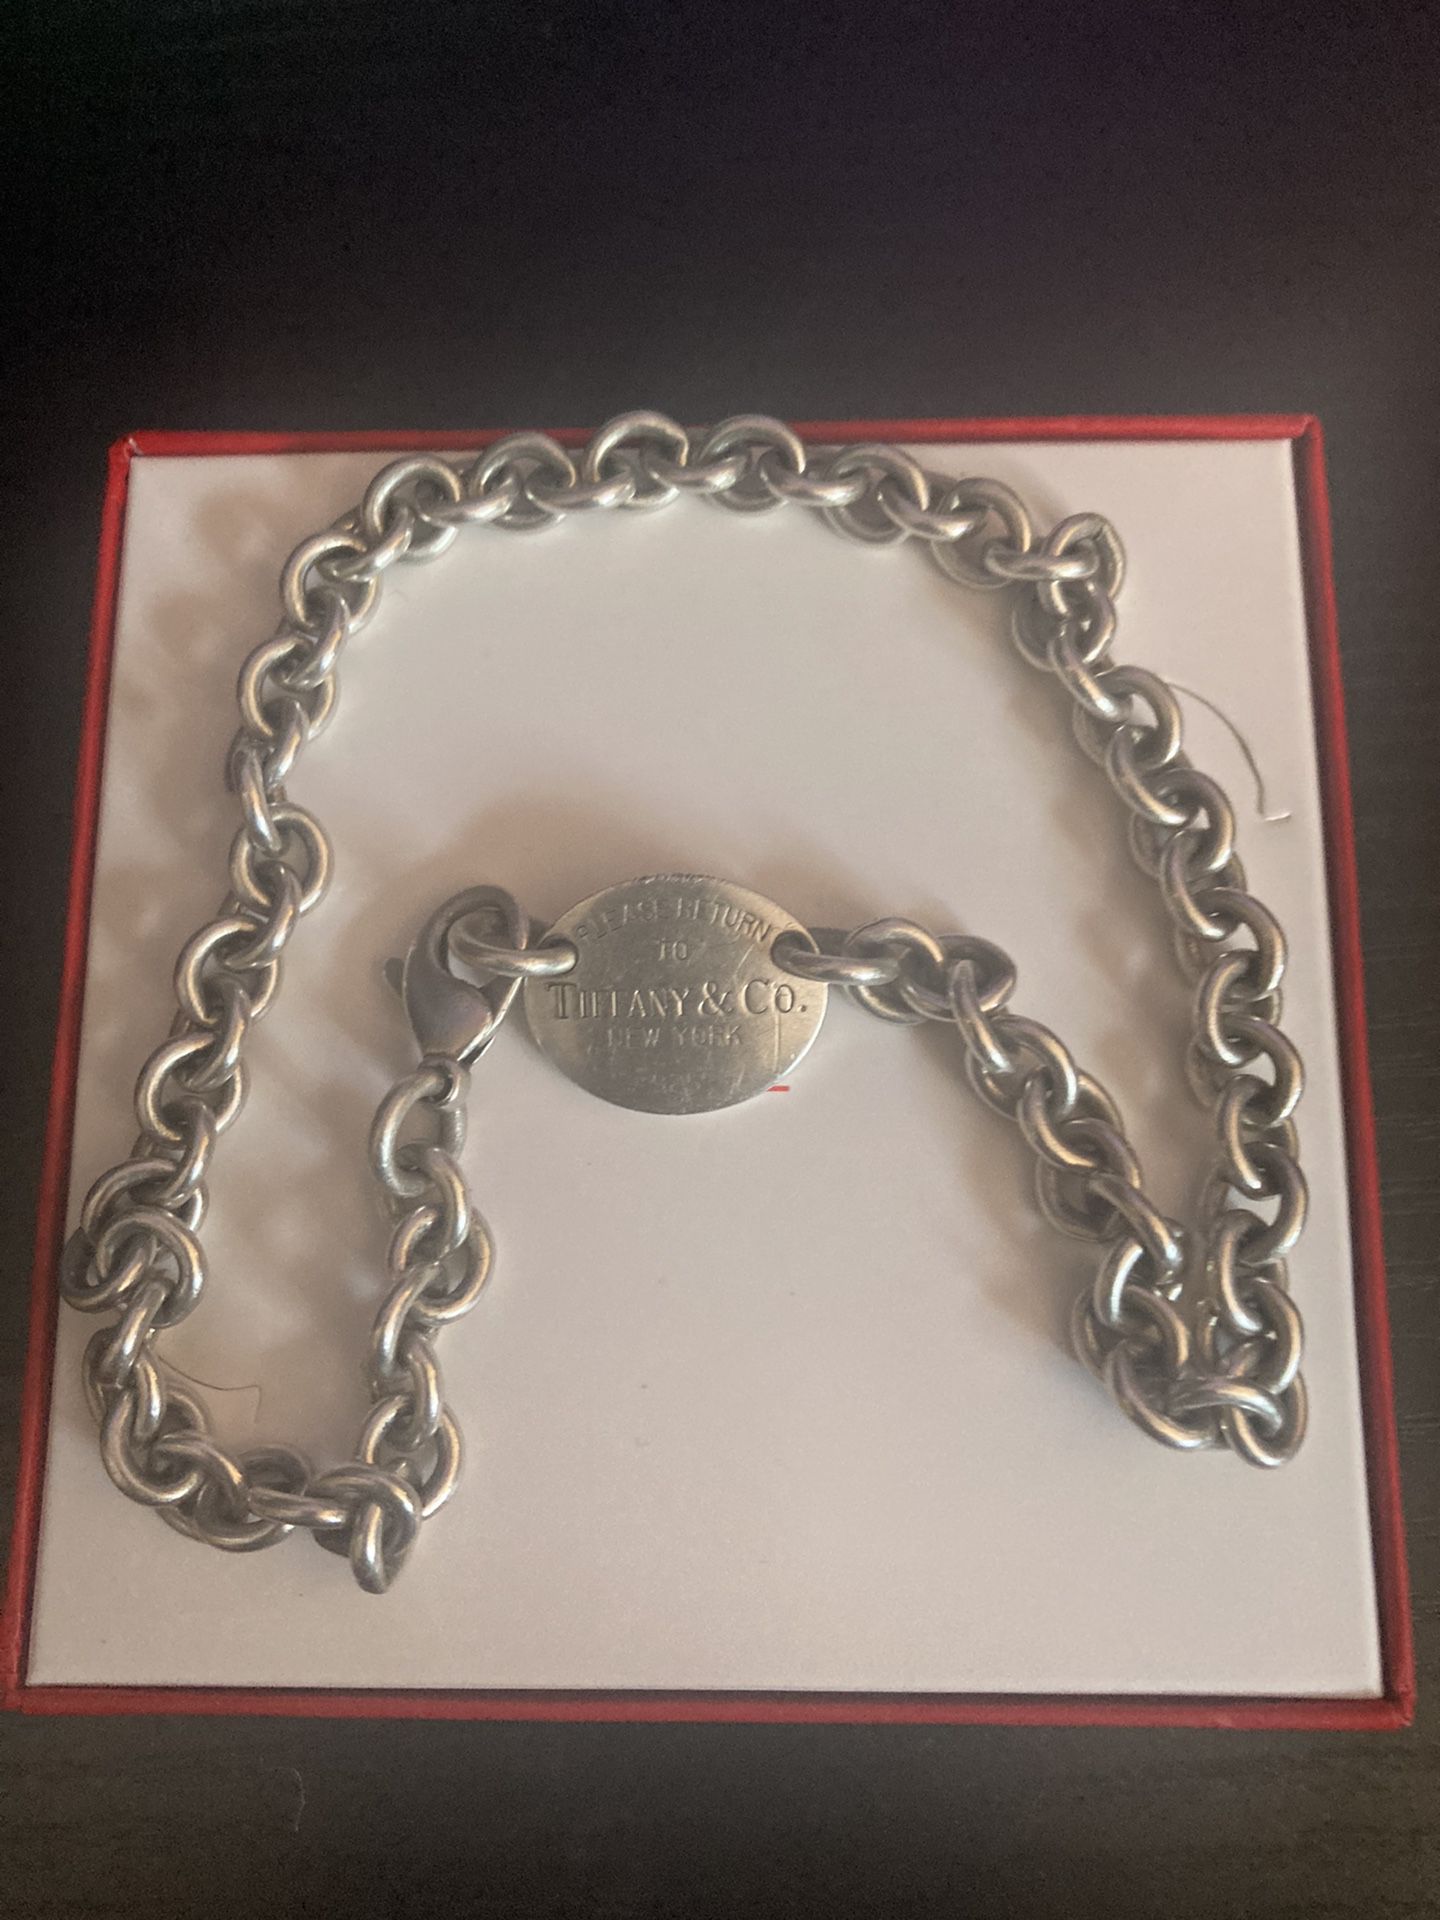 Sterling Silver Tiffany & Co 925 Necklace $200 OBO